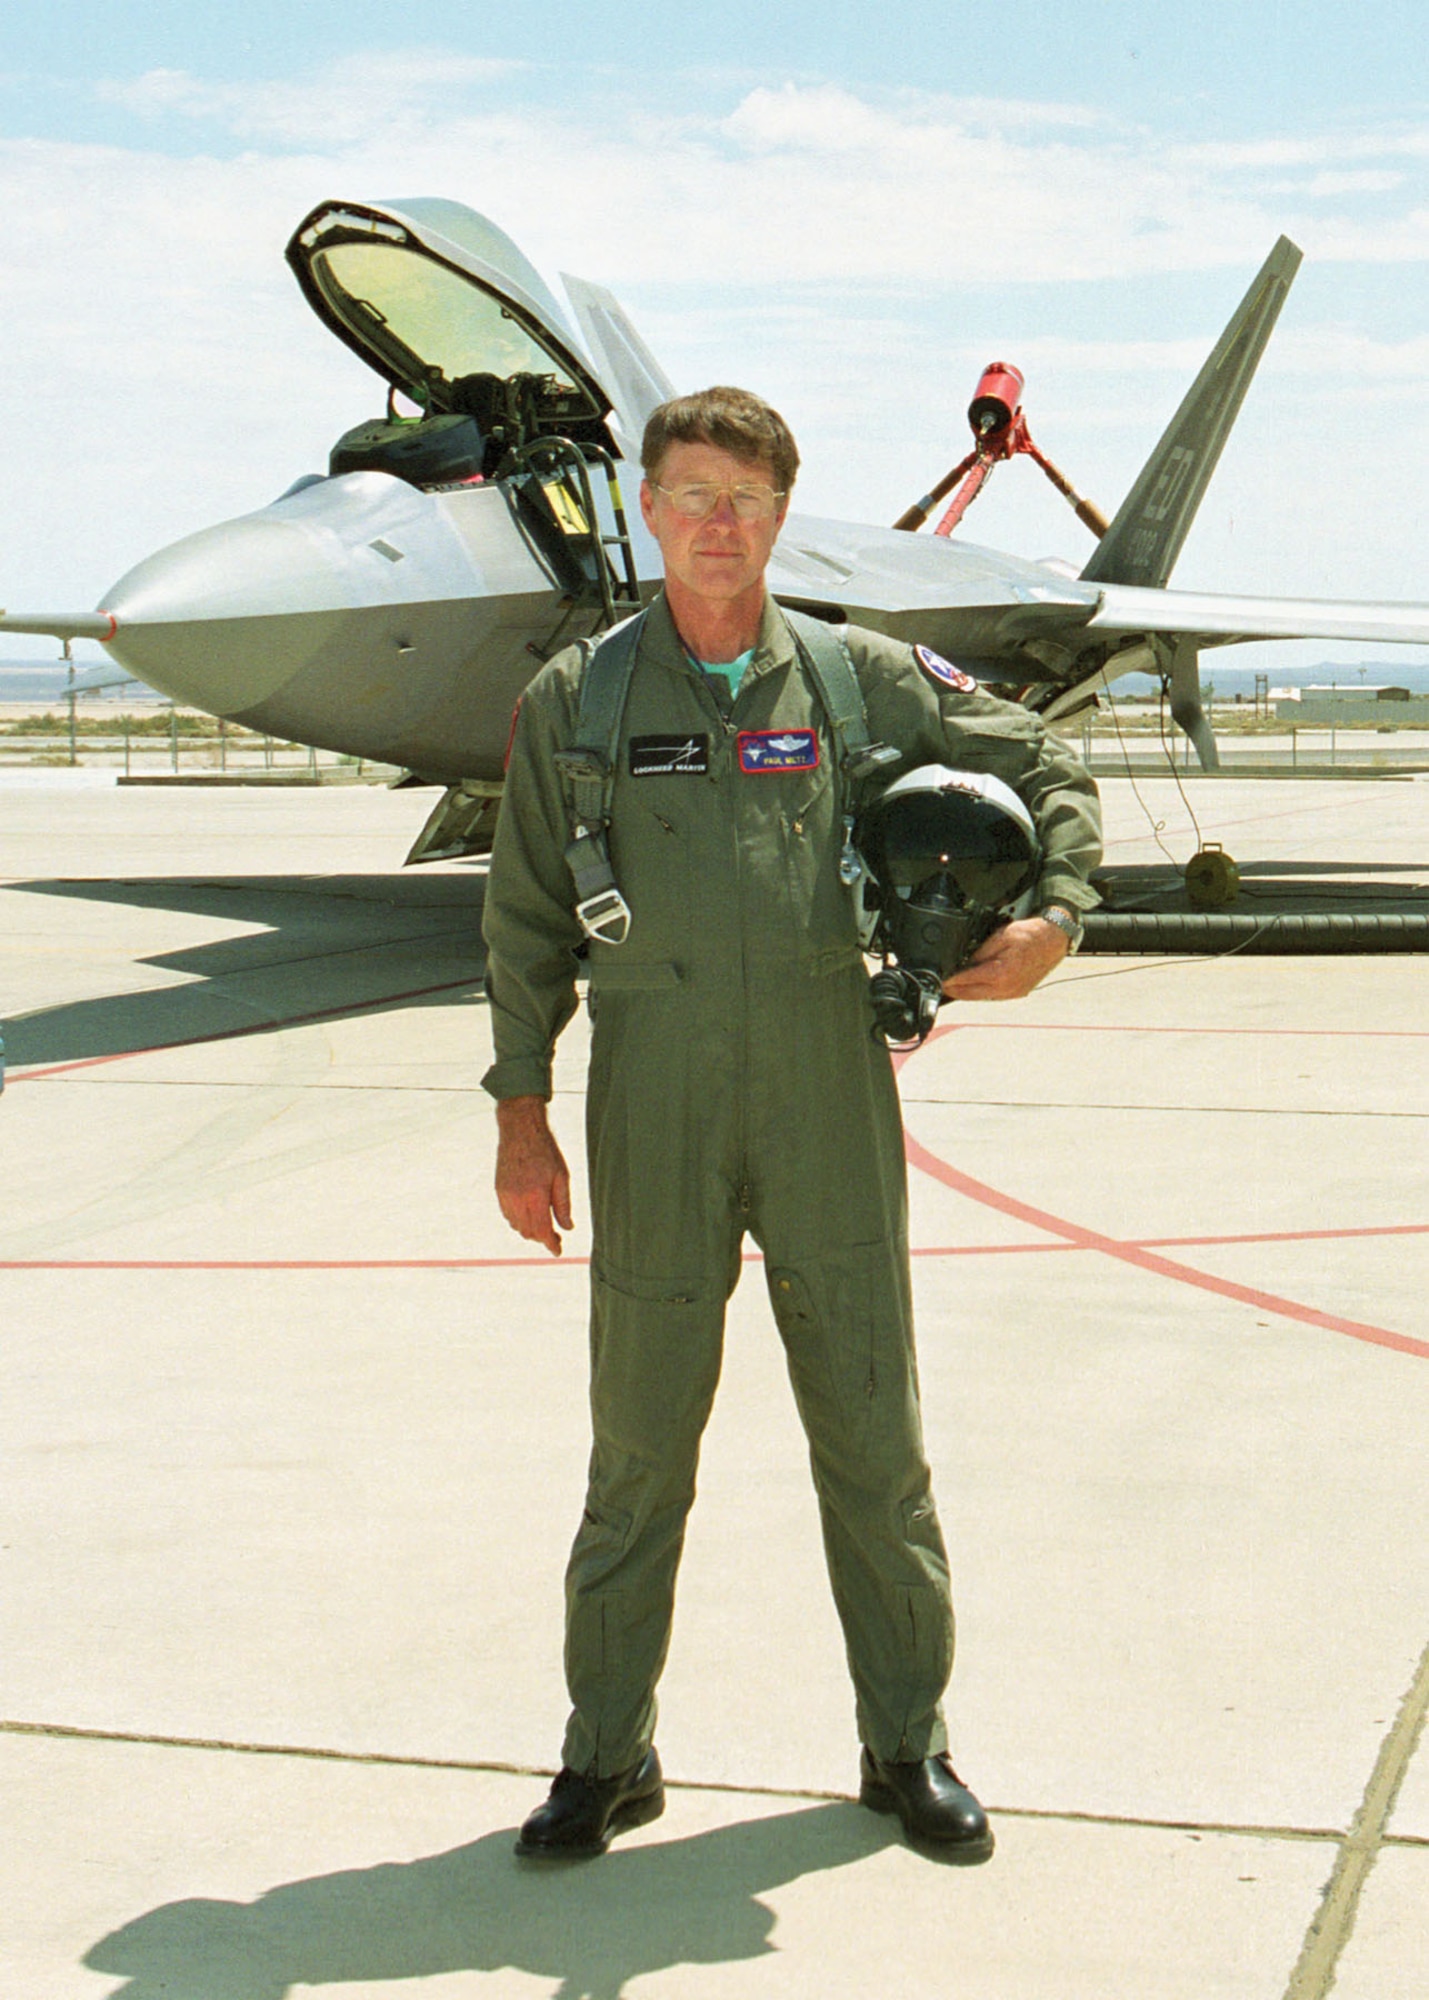 Mr. Paul Metz will present "From Weasels to Raptors: A Test Pilot's Story" at 7:30 p.m. on Nov. 17, 2010. (Photo provided)